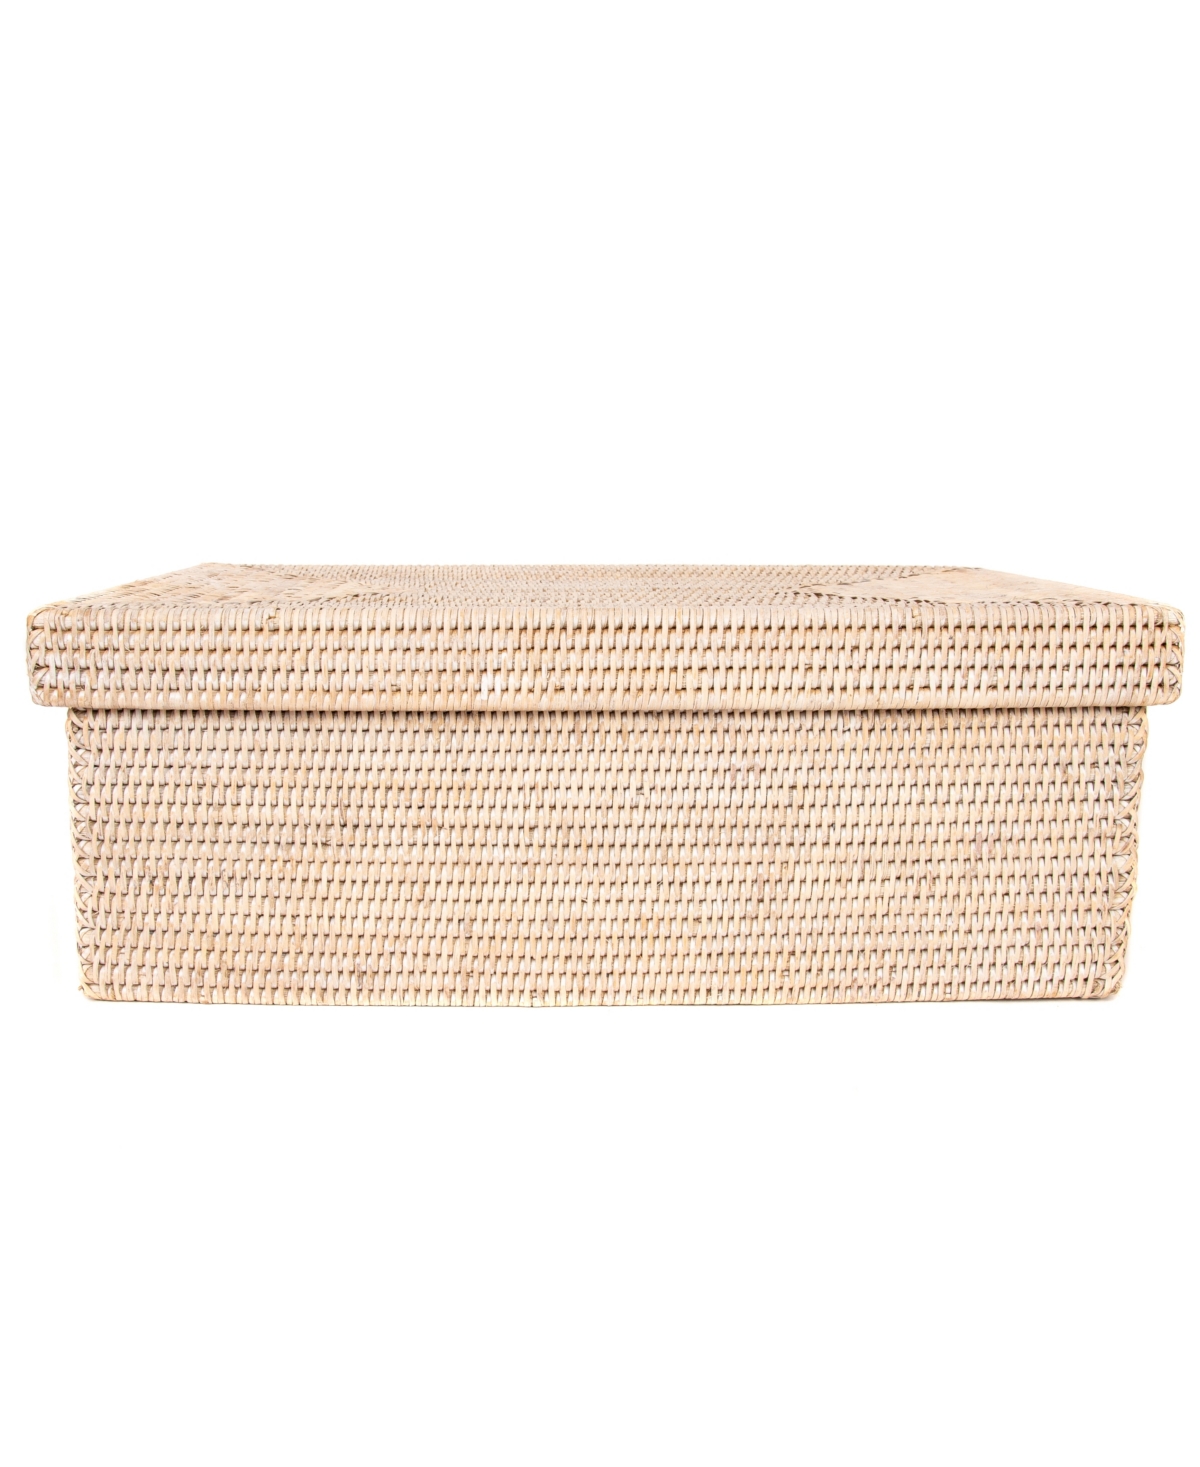 Shop Artifacts Trading Company Artifacts Rattan Rectangular Storage Box With Lid In Off-white